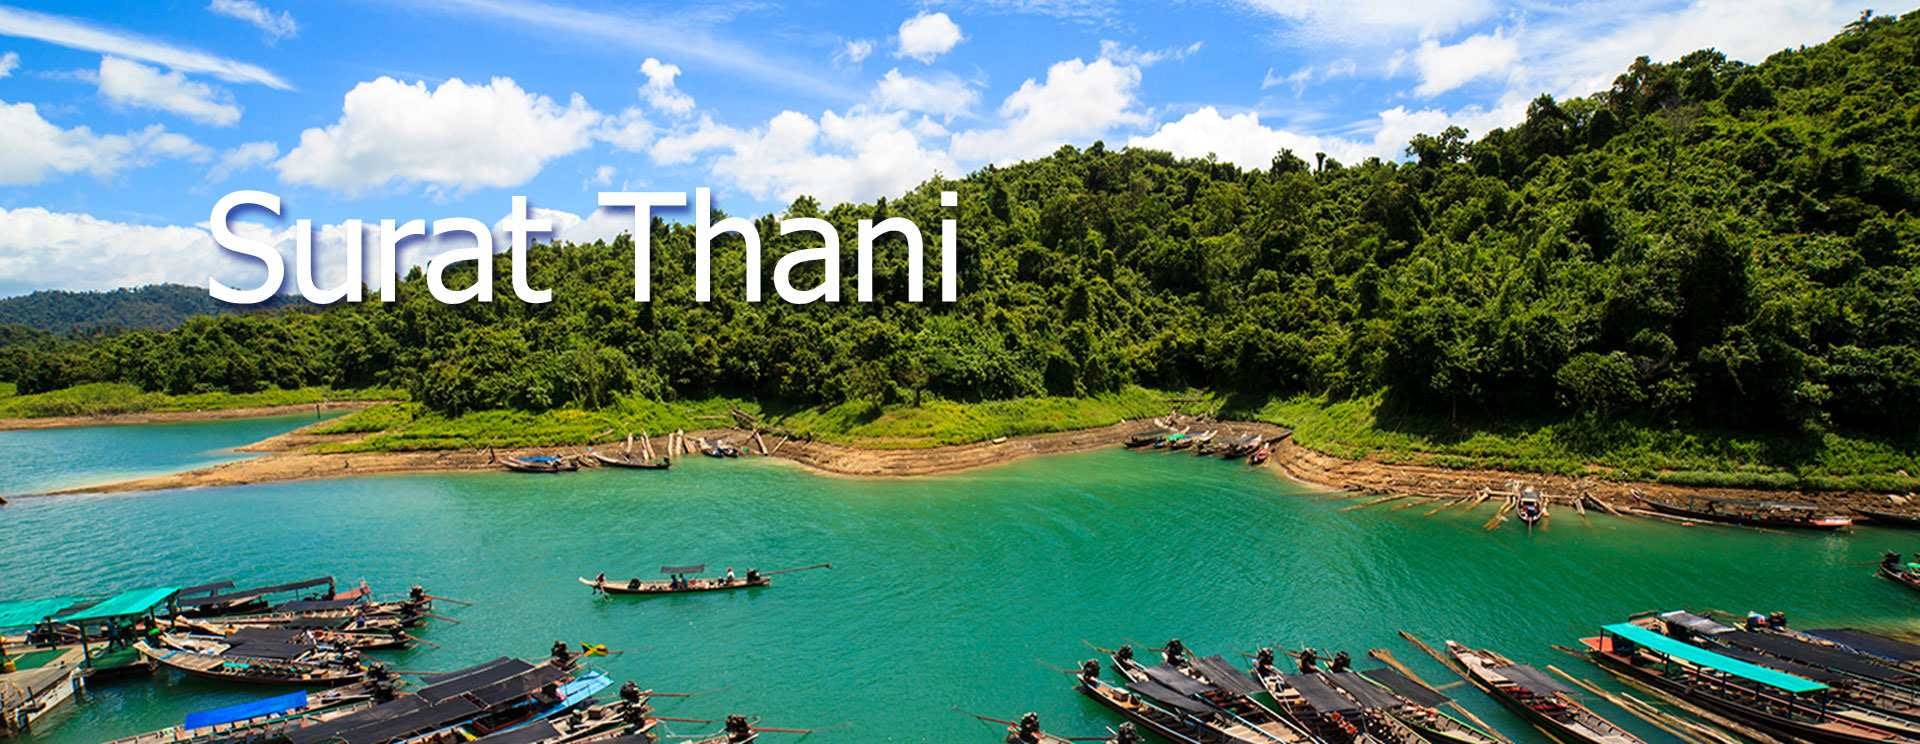 BEST THINGS TO DO IN SURAT THANI - Top Tours & Activities.